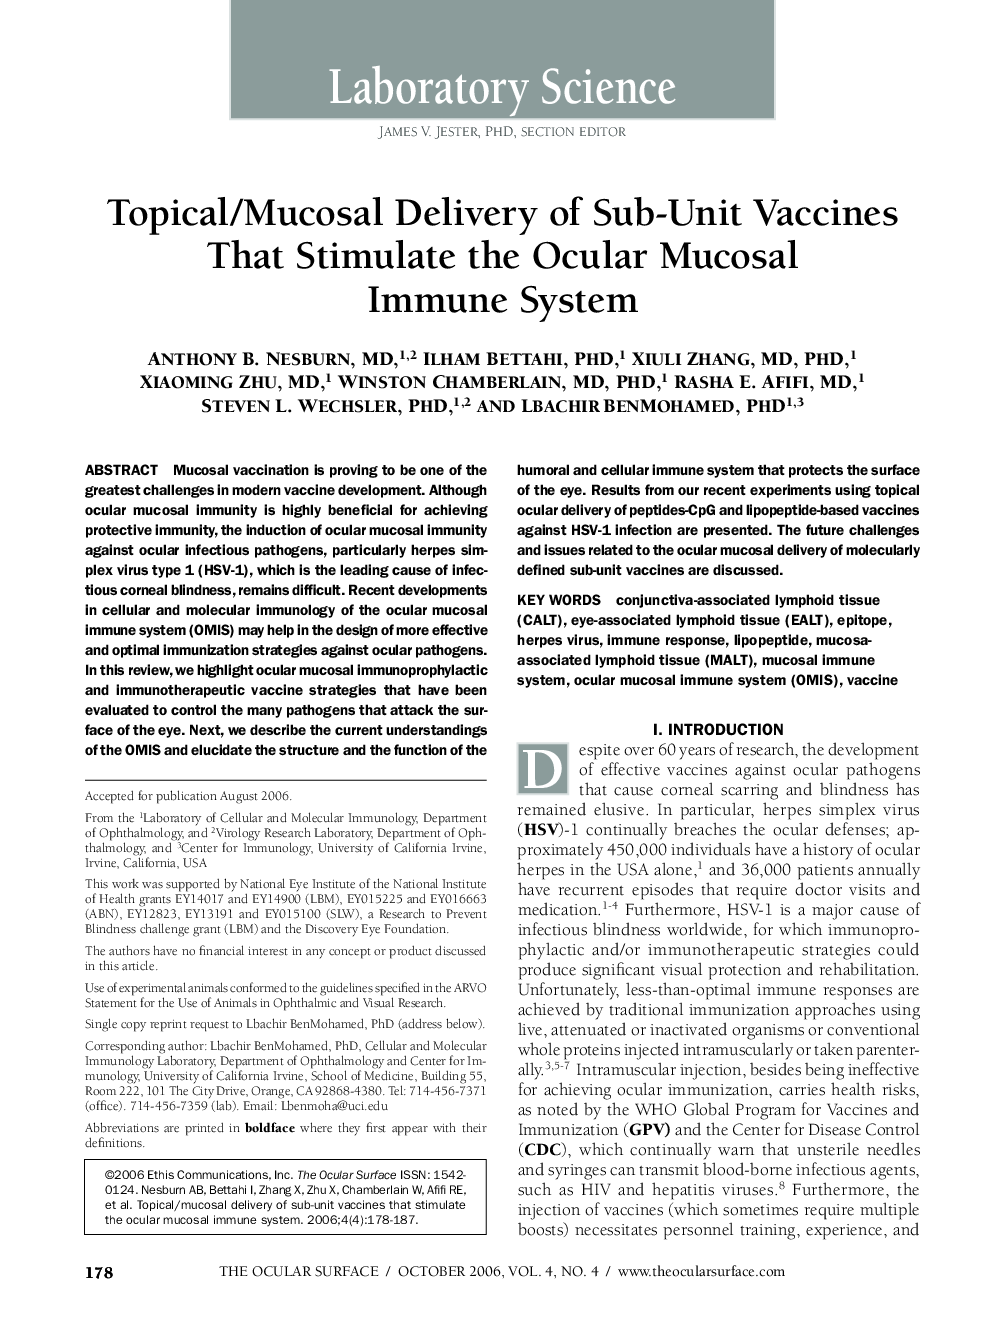 Topical/Mucosal Delivery of Sub-Unit Vaccines That Stimulate the Ocular Mucosal Immune System 